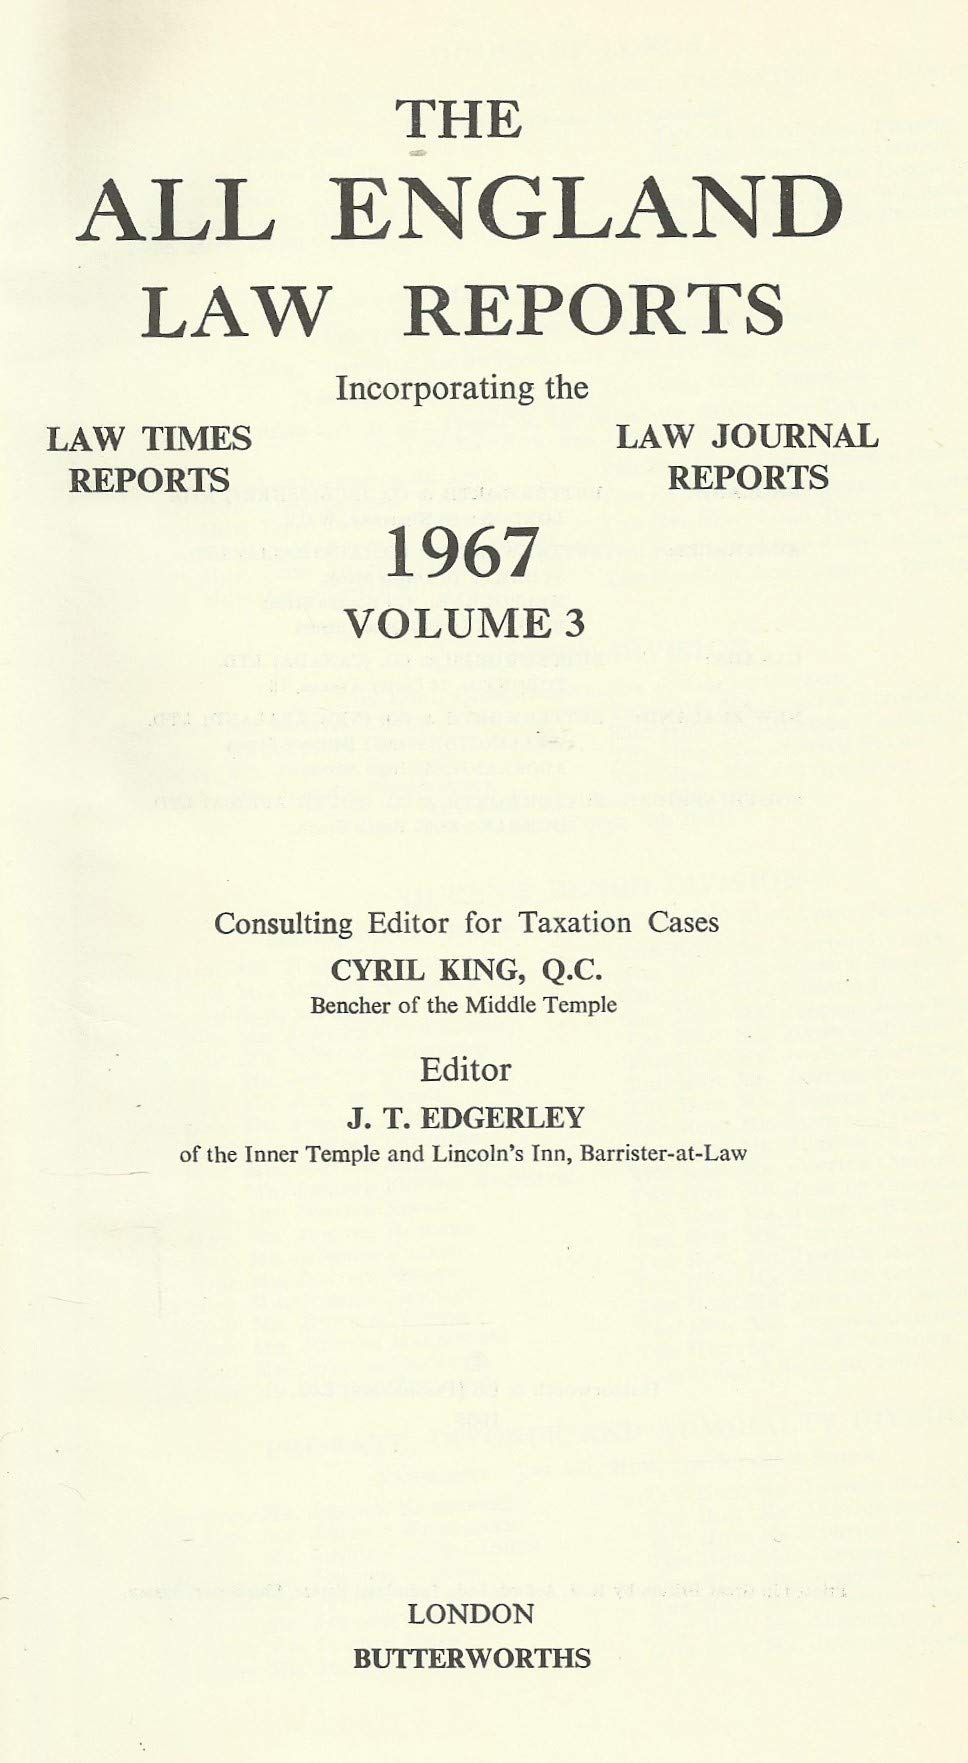 The All England Law Reports 1967 Volume 3